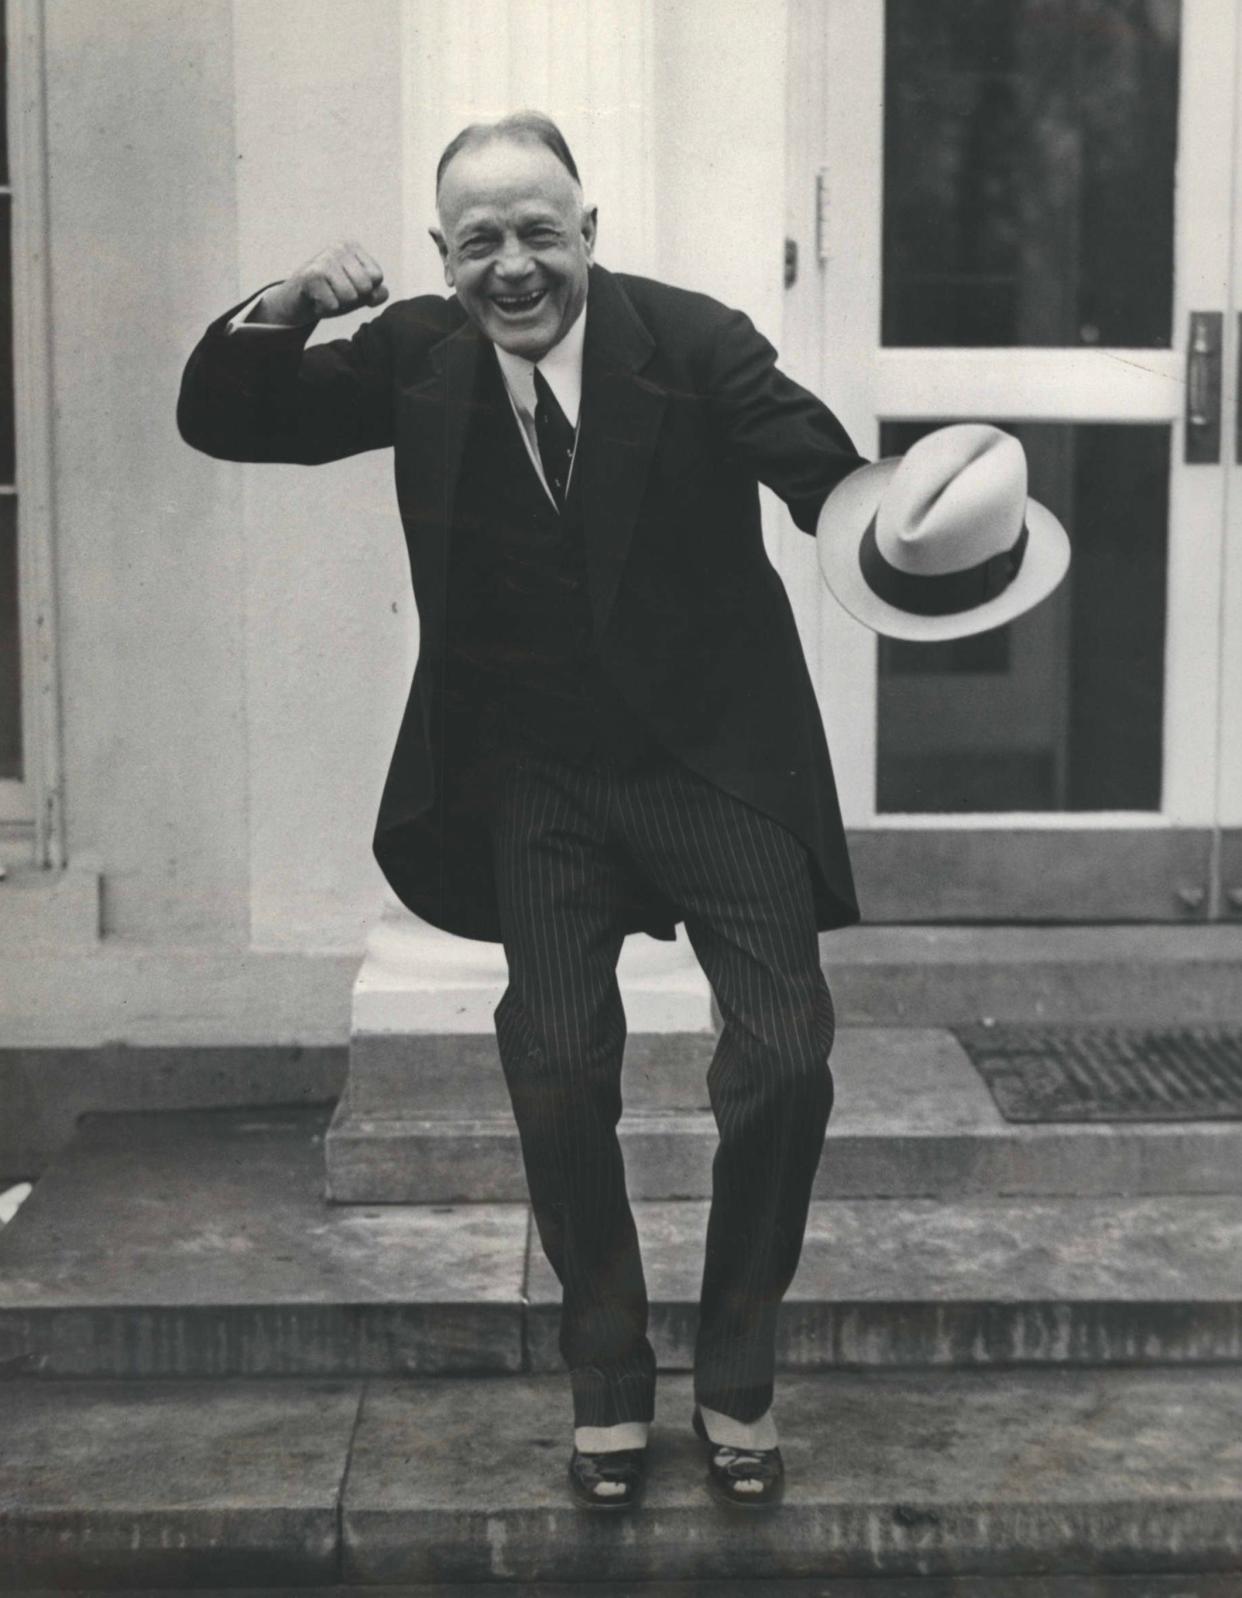 Billy Sunday at White House on Easter Monday 1931 before the huge throngs that gathered at the White House for the traditional Easter Monday Egg Roll. He was later received by President Herbert Hoover.